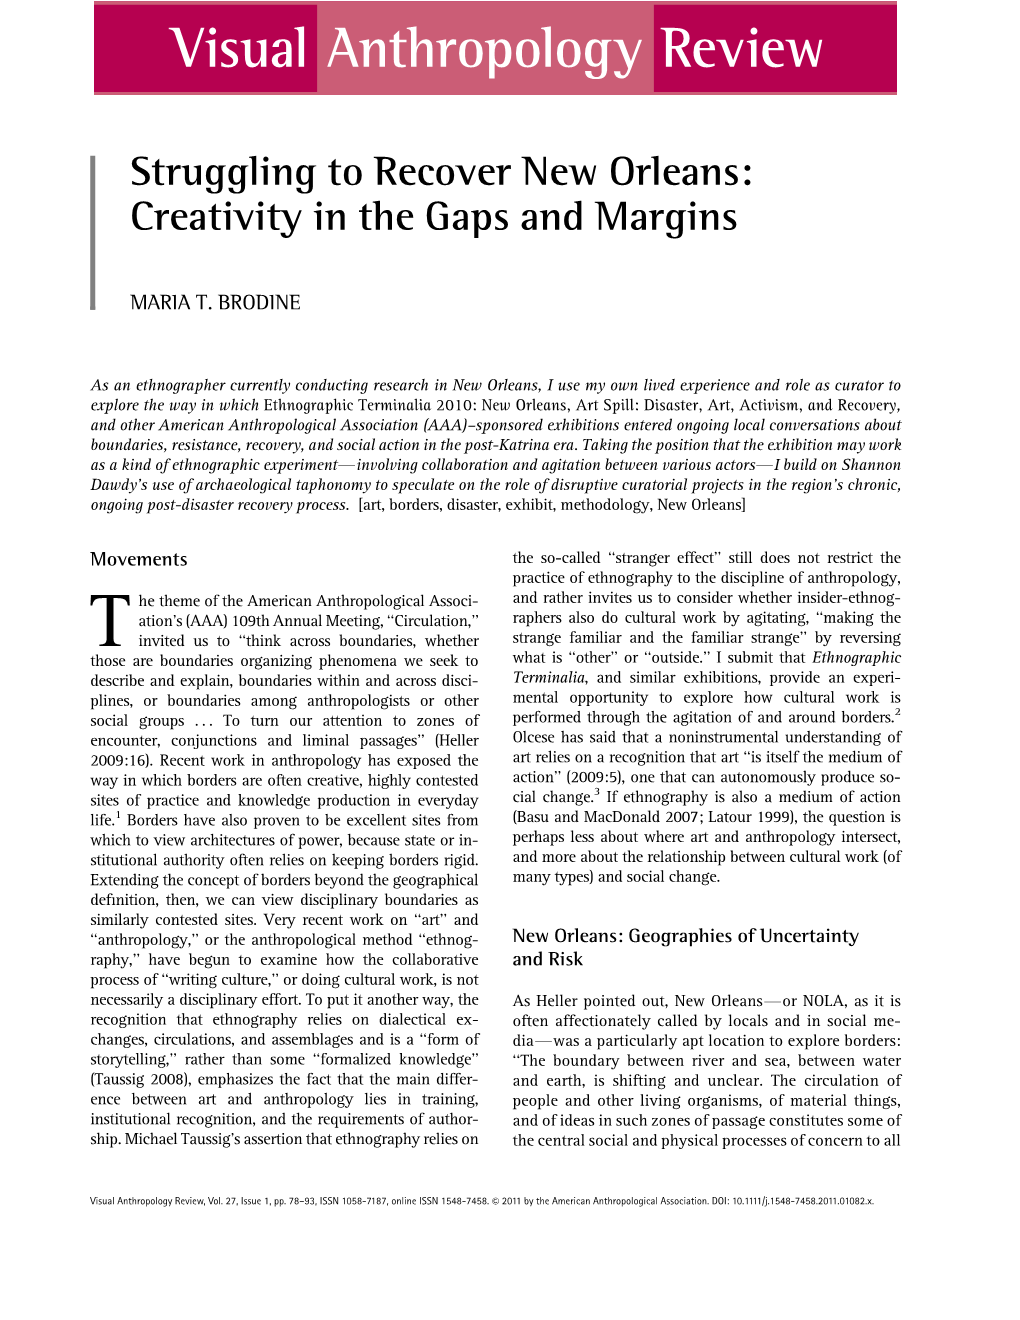 Struggling to Recover New Orleans: Creativity in the Gaps and Margins